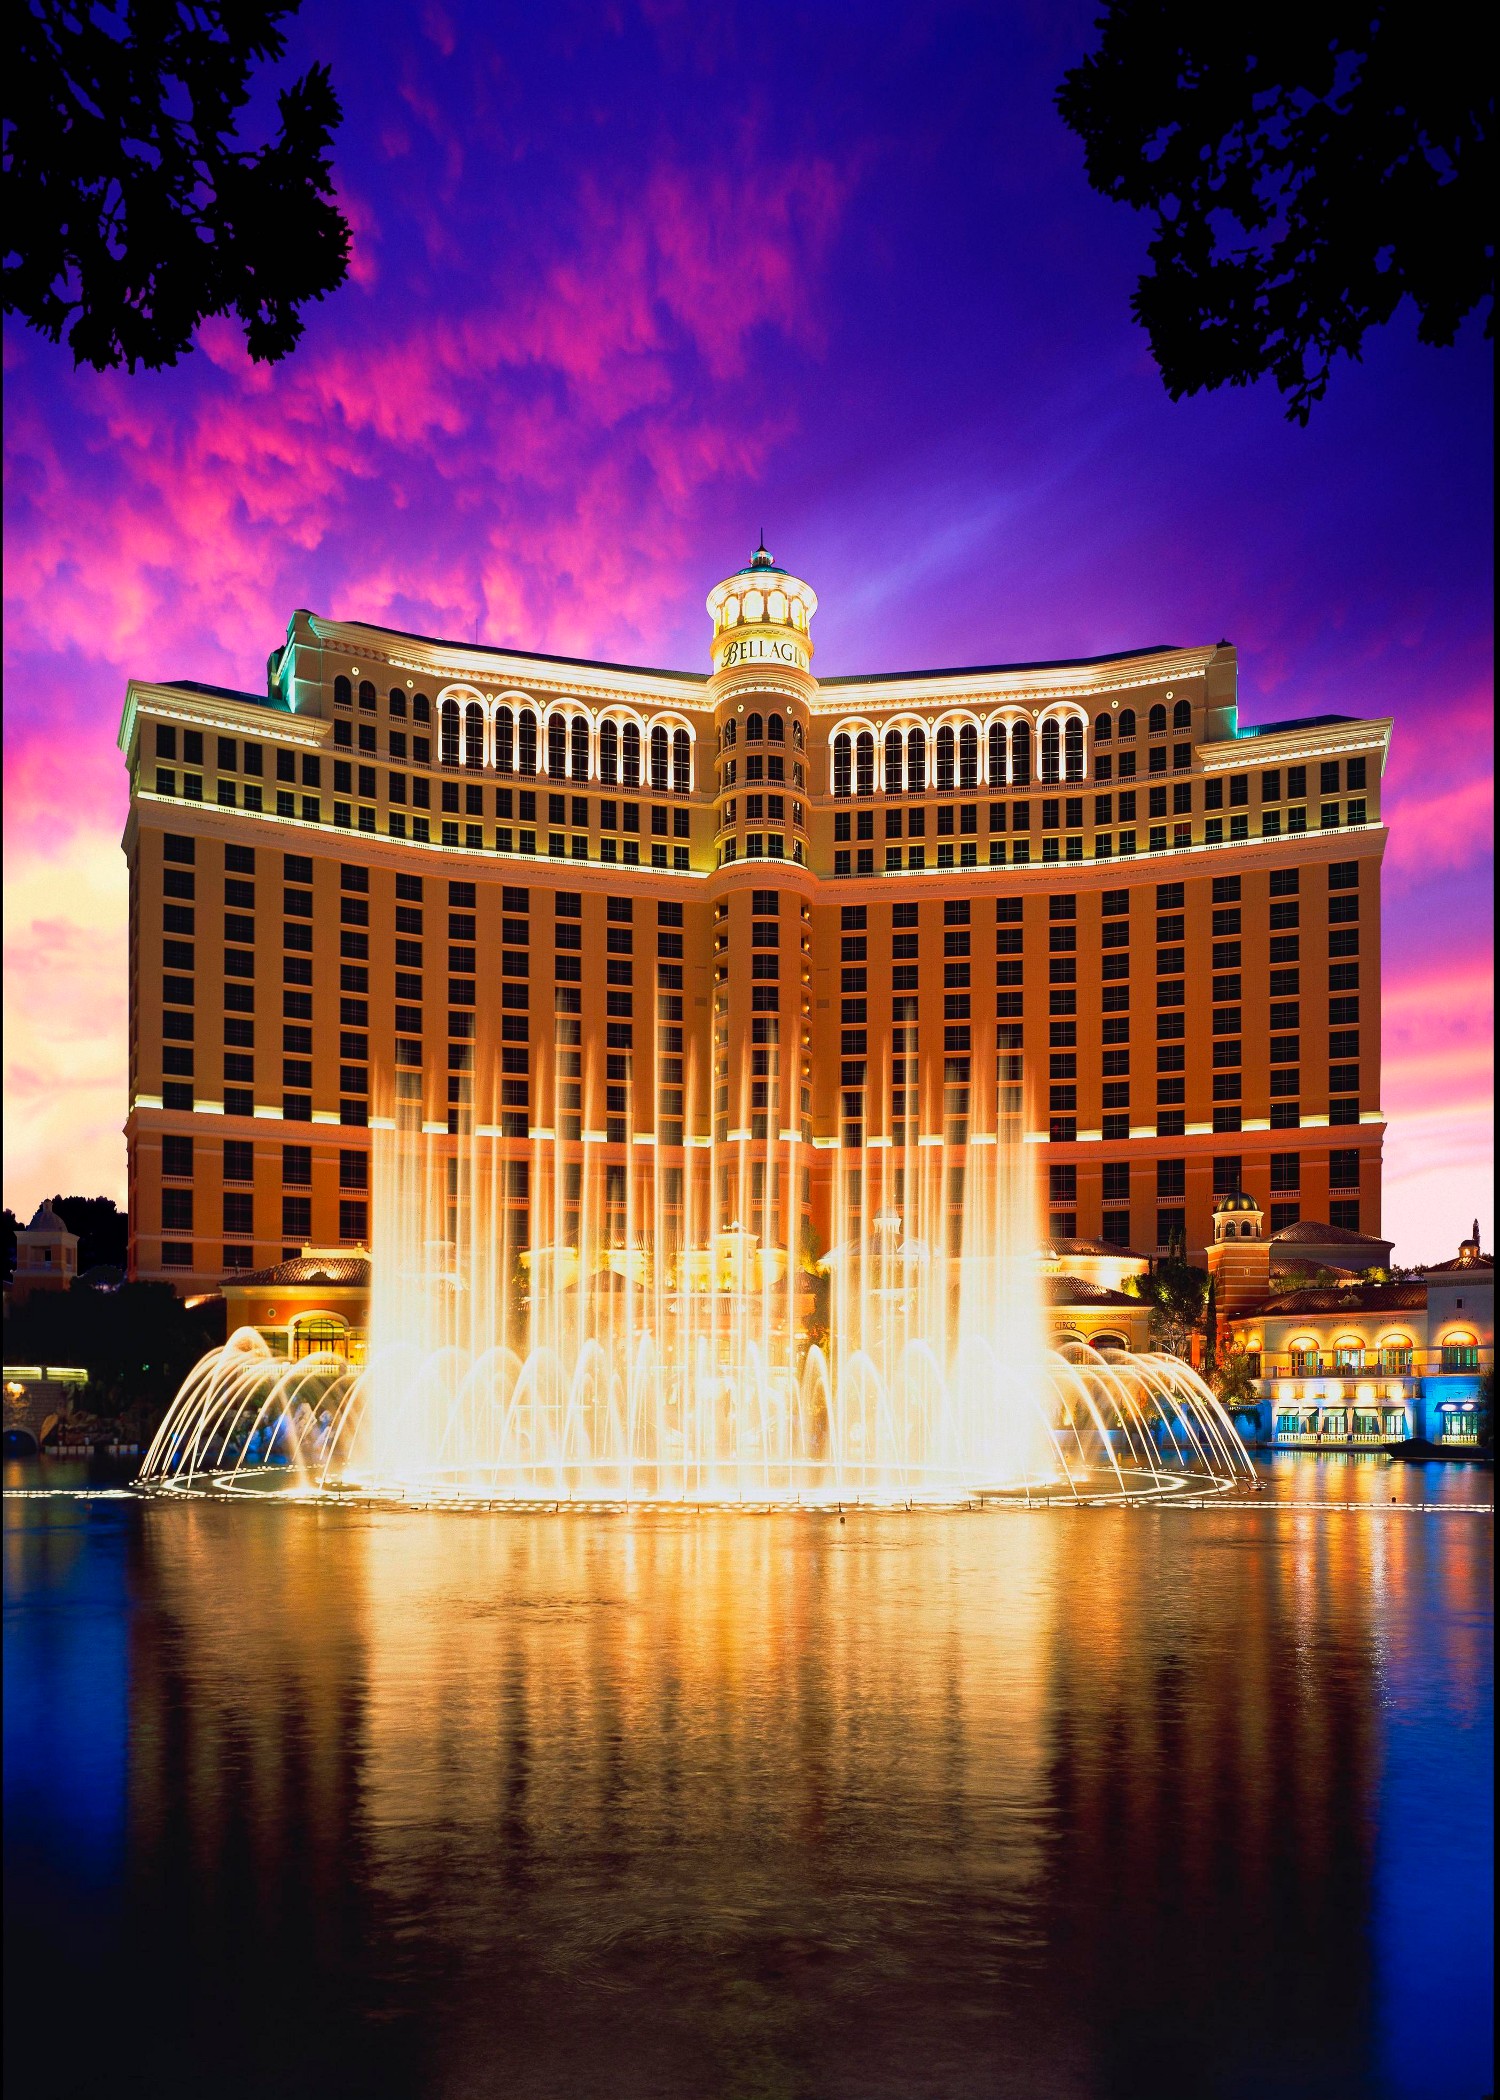 Bellagio Hotel and Casino, plan the best golf holiday in Nevada